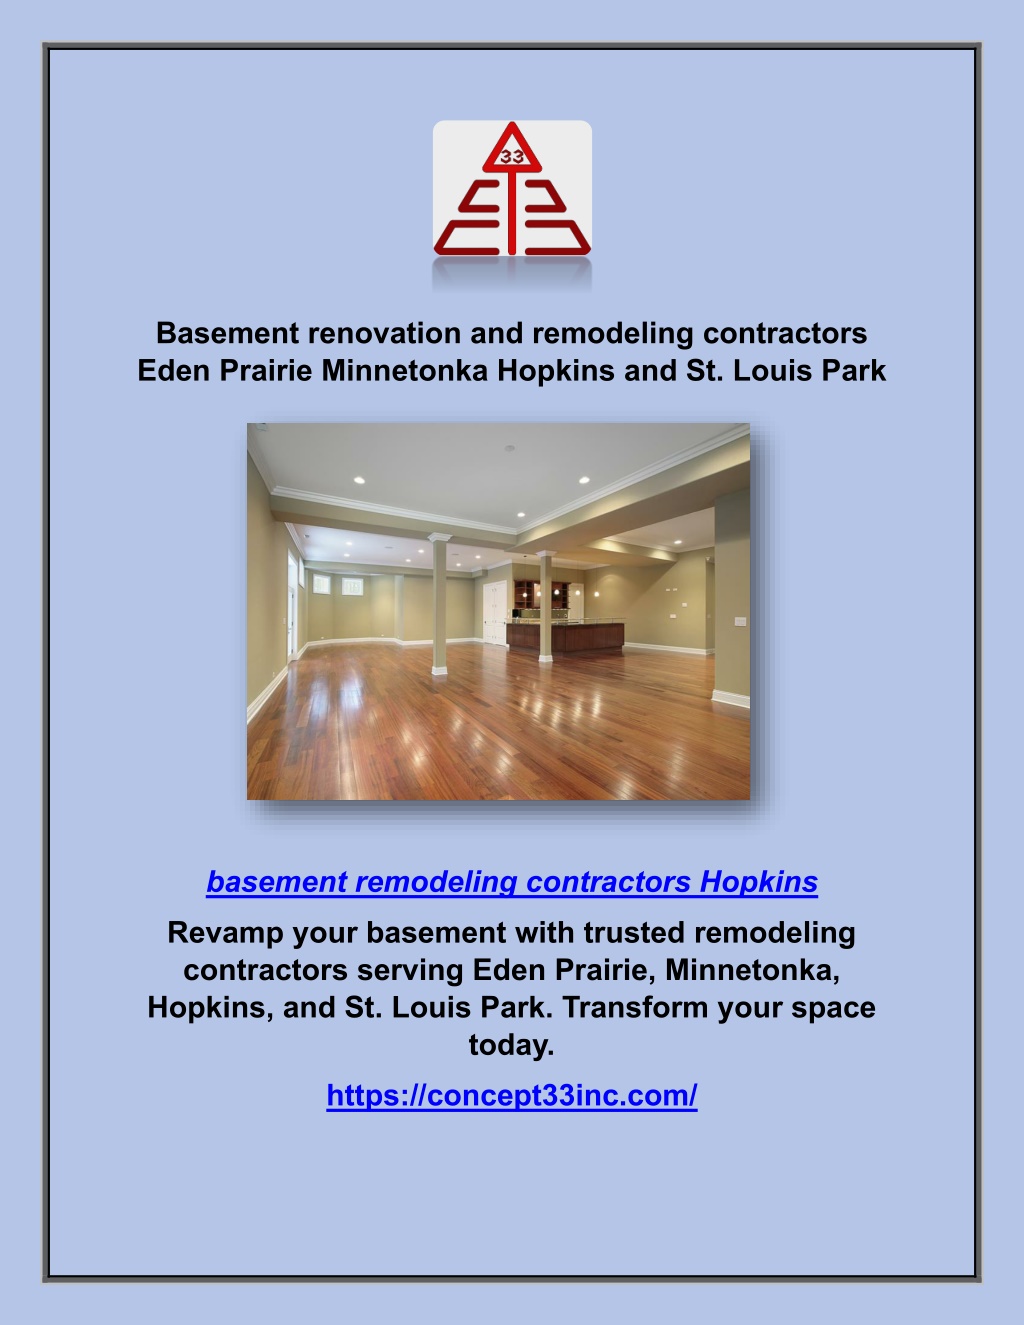 basement renovation and remodeling contractors l.w